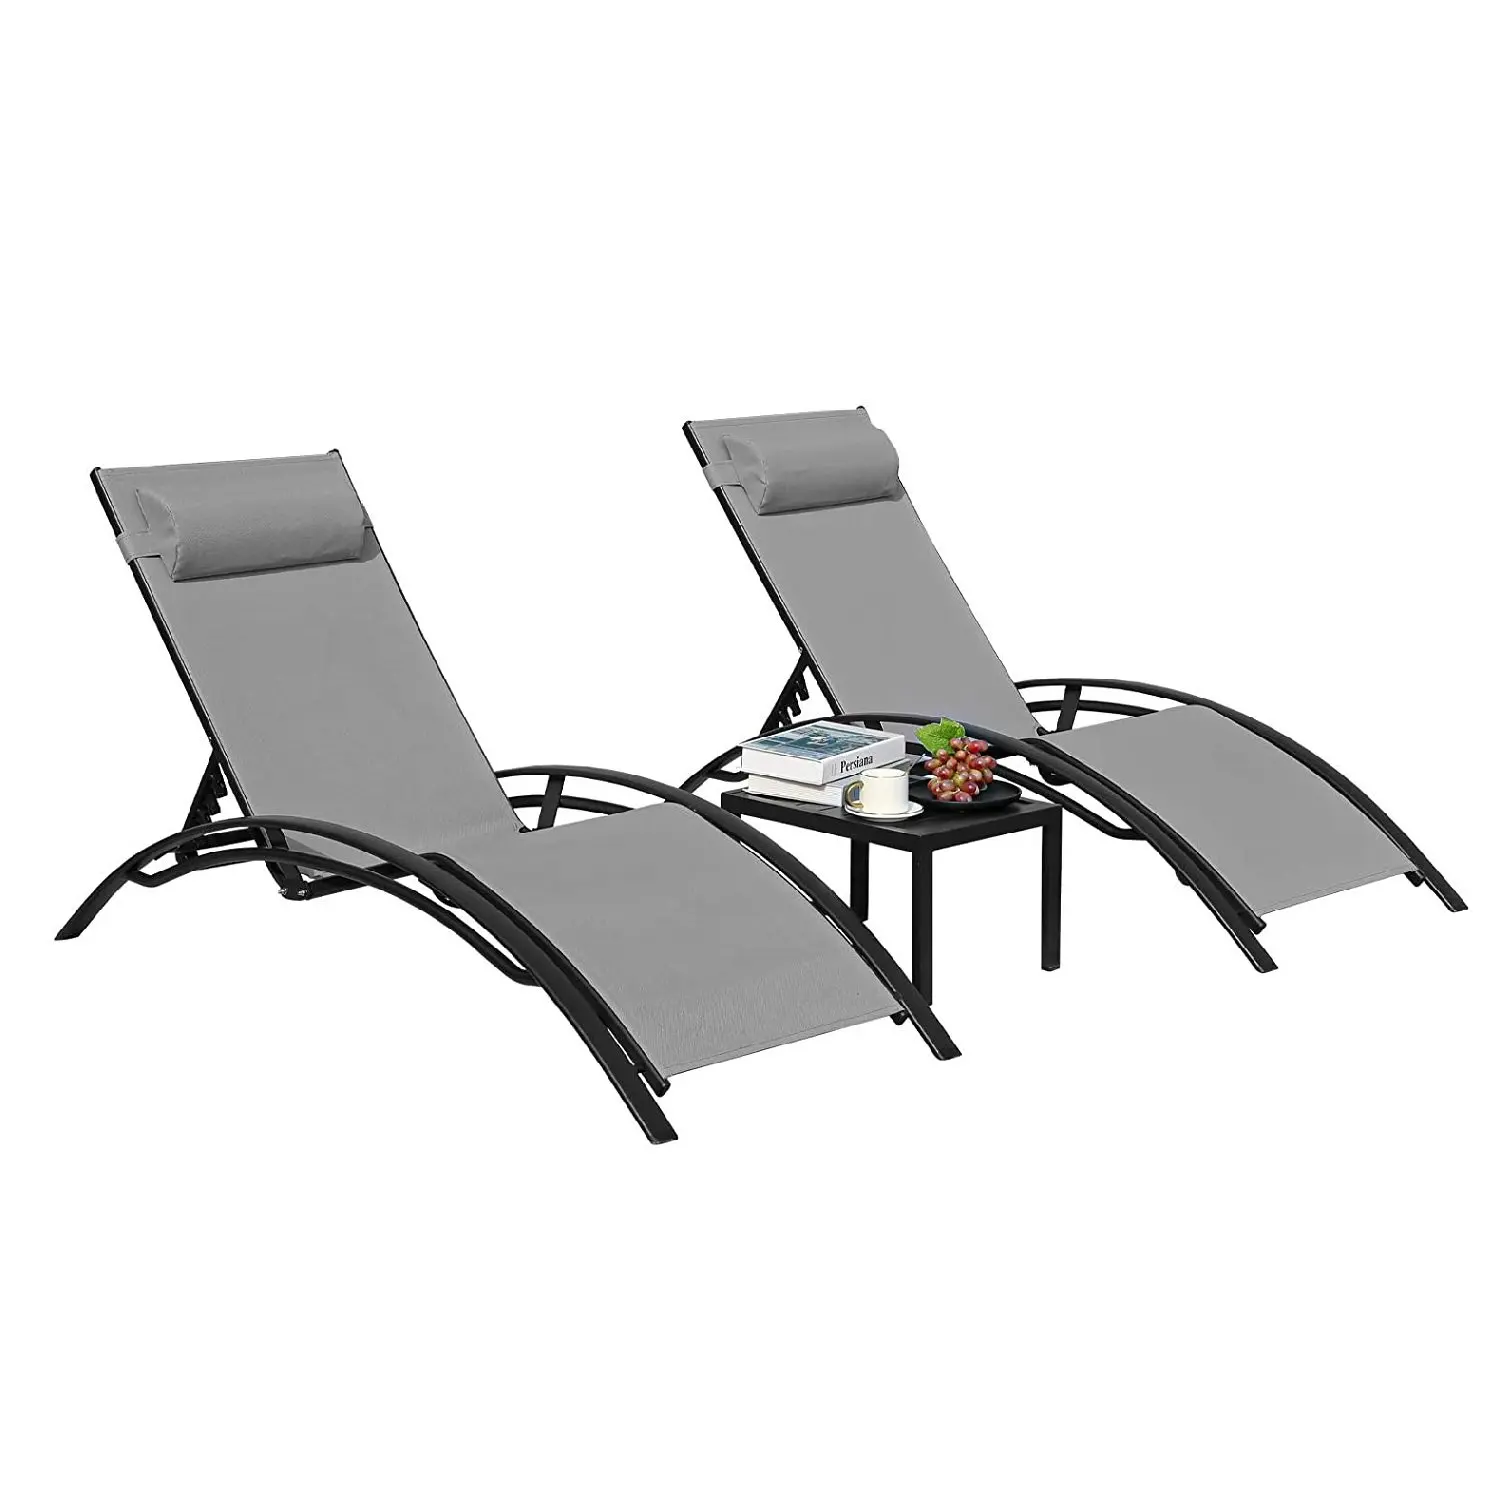 

3Pcs Sun Lounger Recliner Set Aluminum Chaise Lounges,Reclining Chair With 5 Adjustable Backrest, Head Cushion, Table For Garden